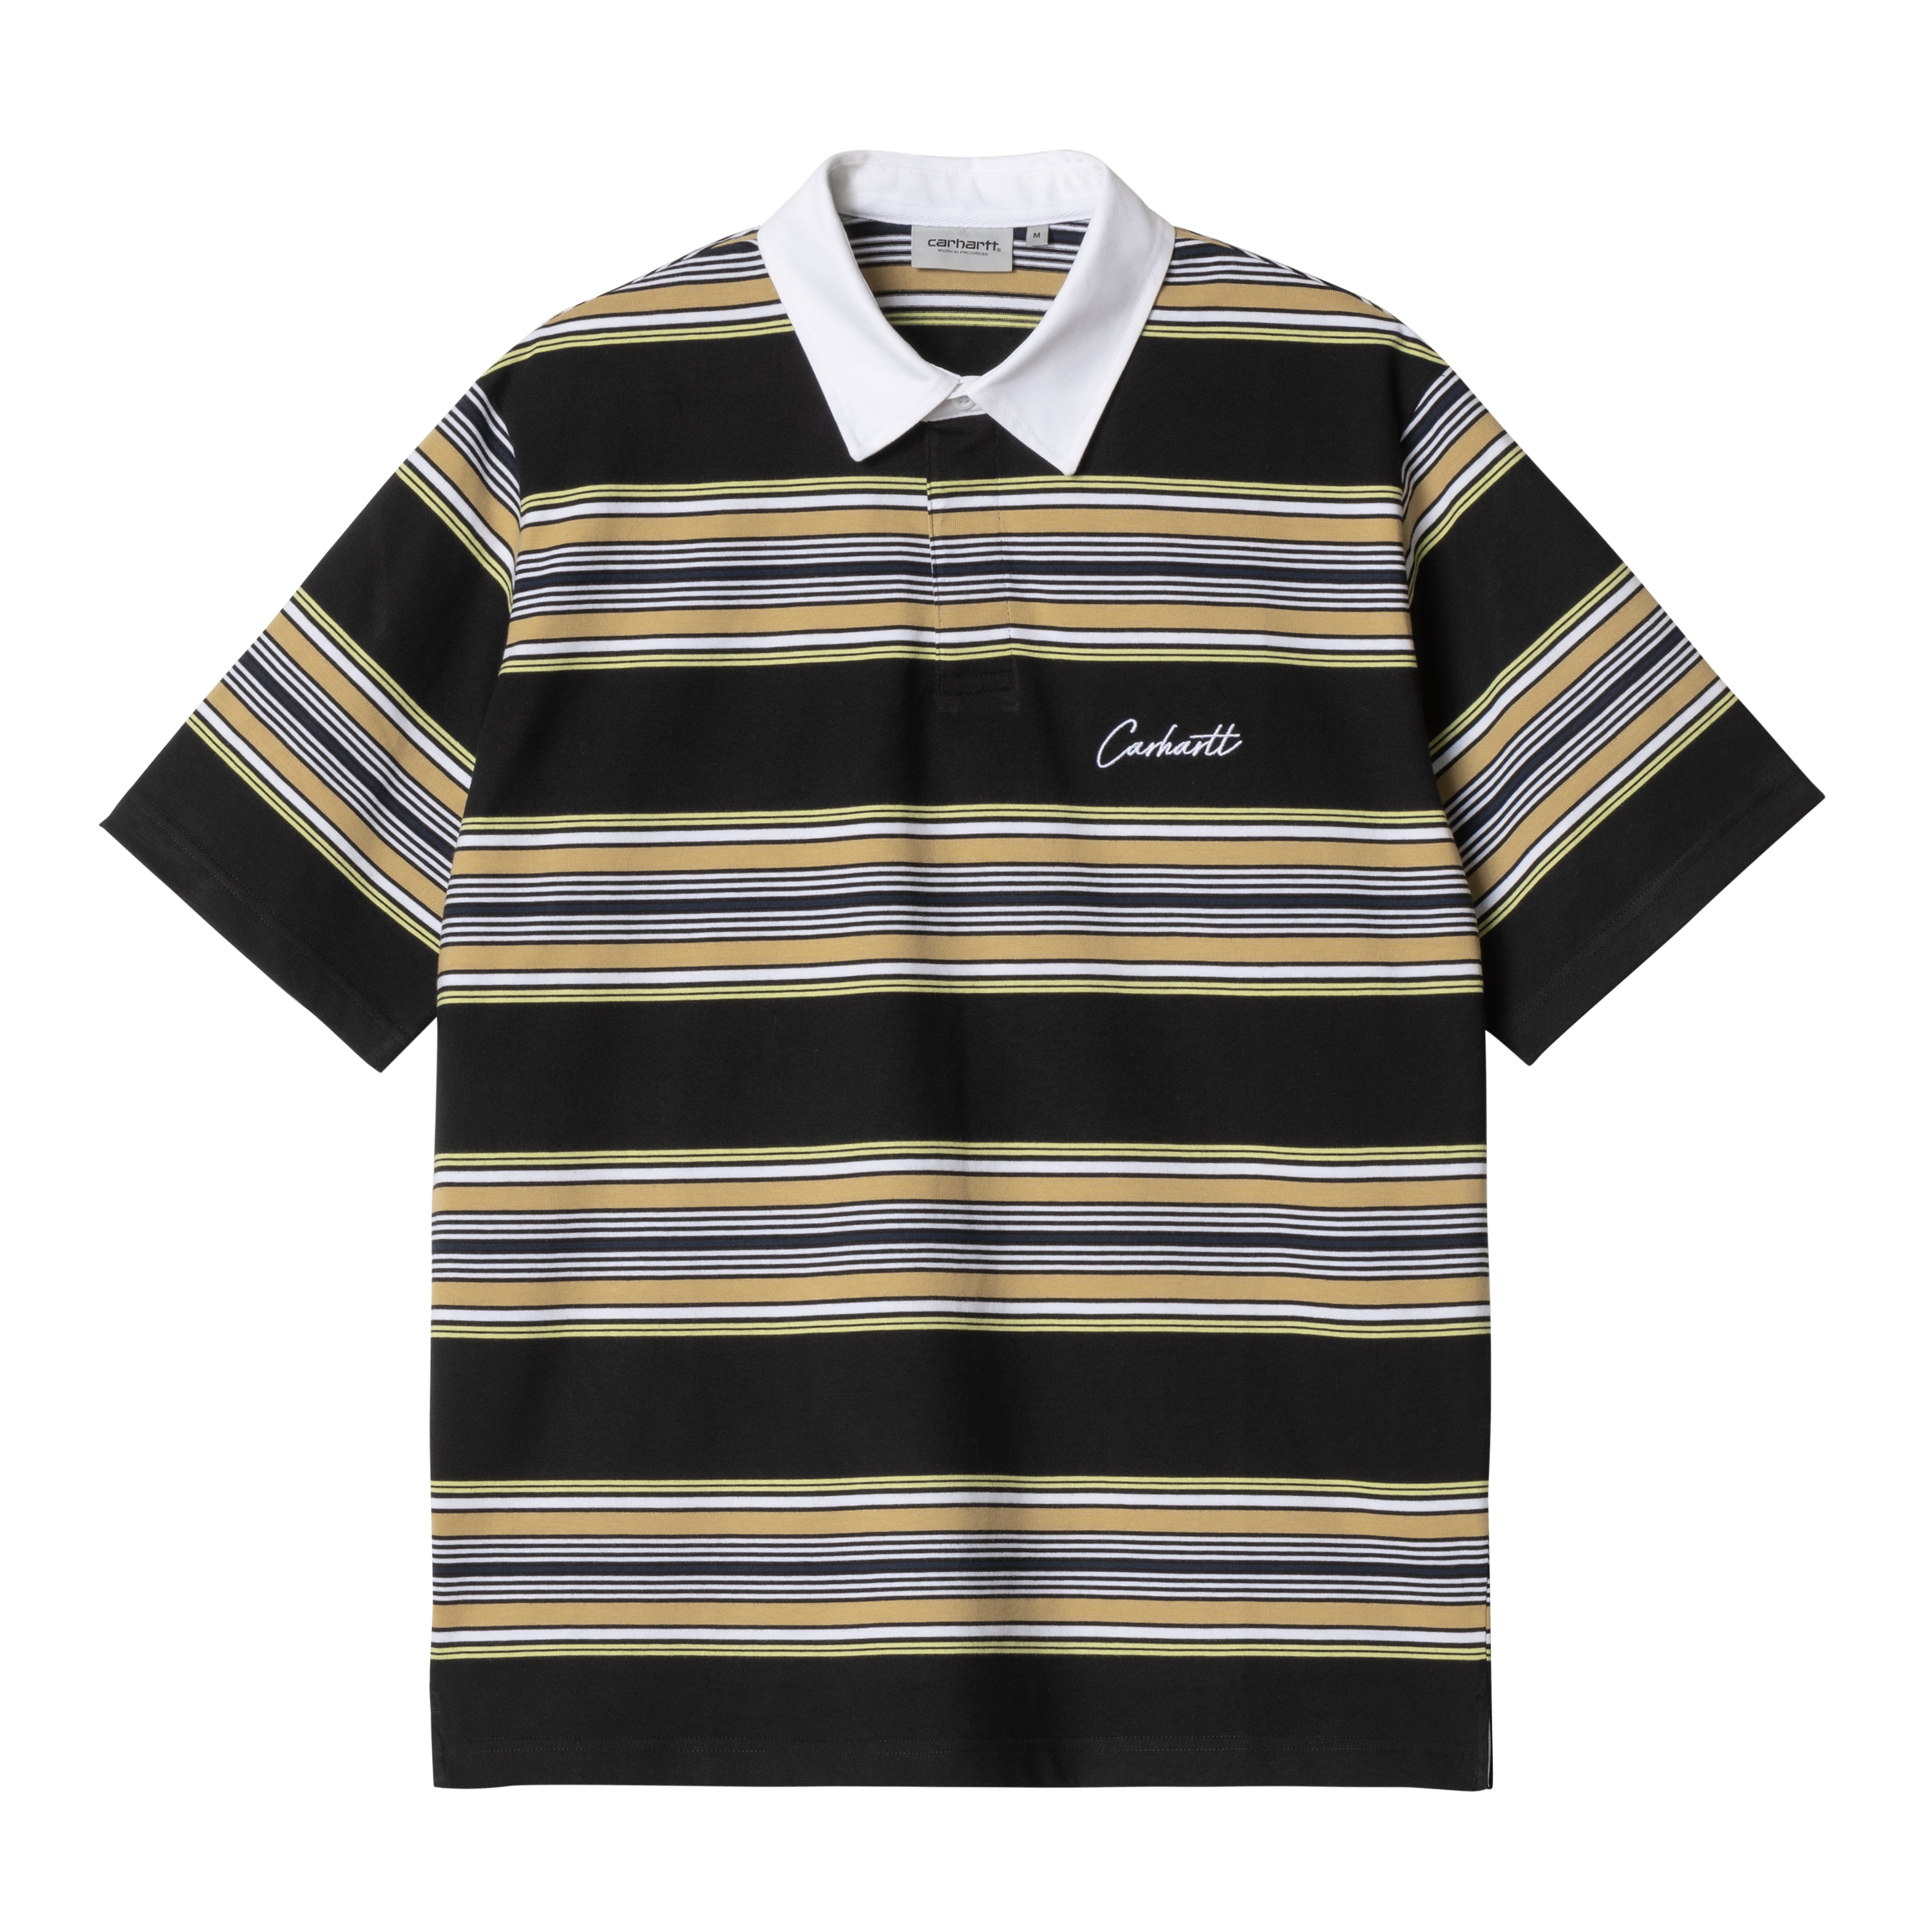 Carhartt WIP Short Sleeve Gaines Rugby Shirt in Multicolore